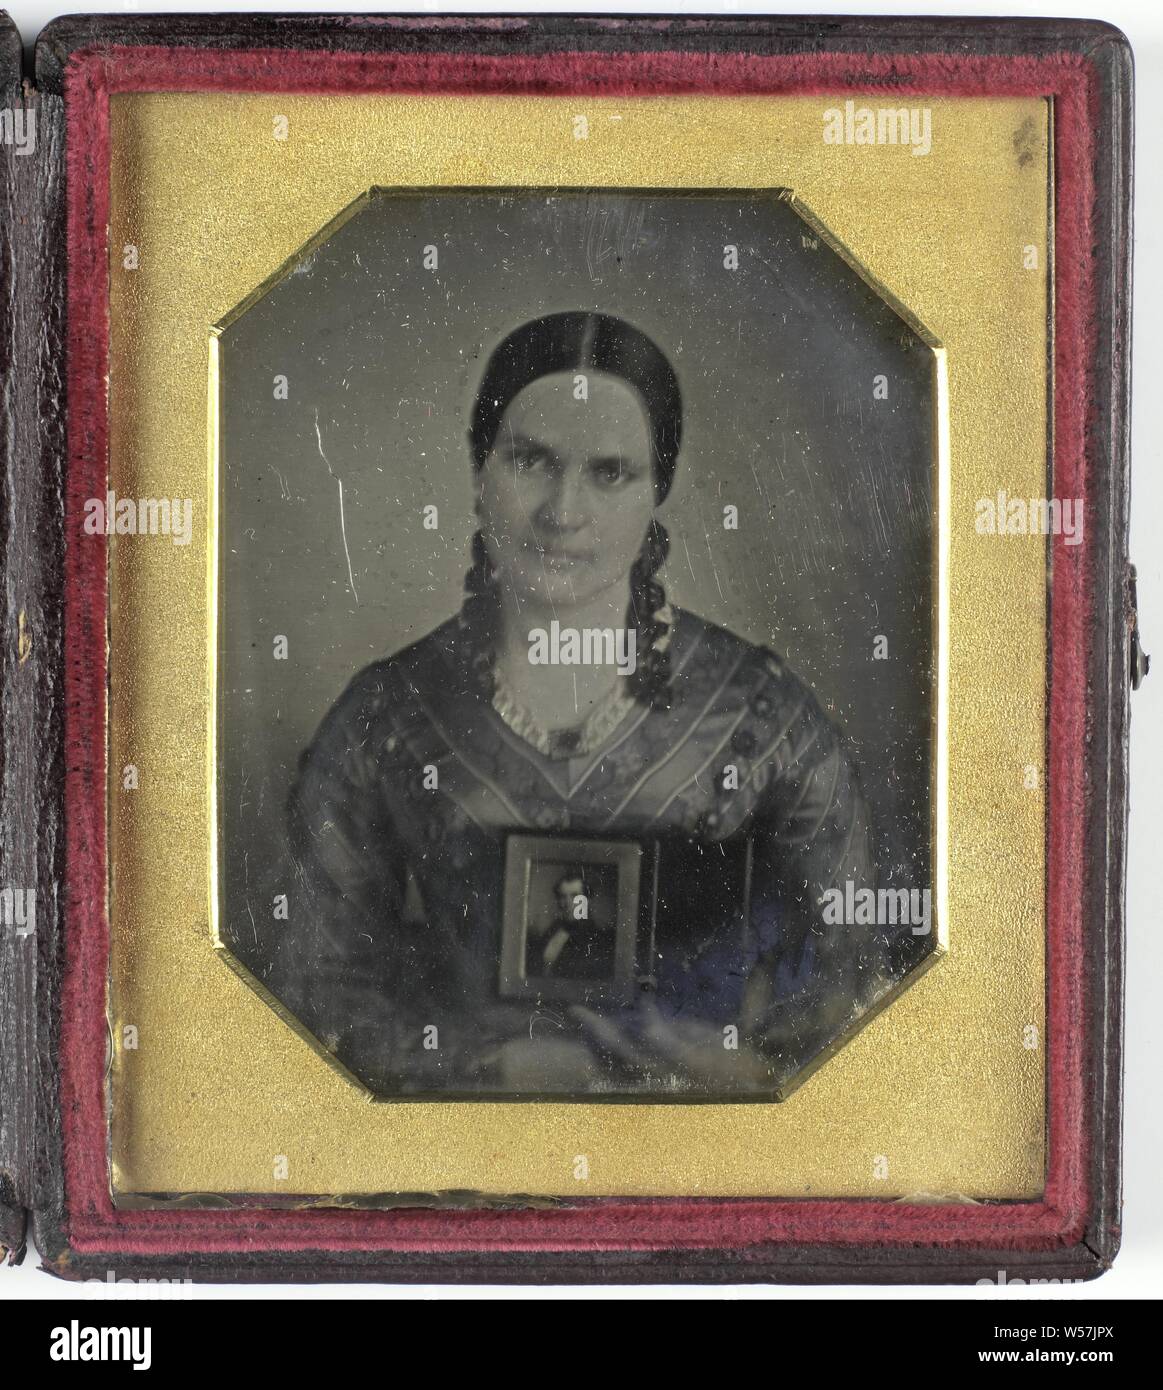 Portrait of a Young Woman with a Daguerreotype, Portrait of an Unknown Woman with Daguerreotype, a Portrait of a Man, Historical Person, Adult Woman, Photograph, Mathew Benjamin Brady (attributed to), 1840 - 1860, copper (metal), glass, leather, velvet (fabric weave), silk, h 66 mm × w 53 mm h 93 mm × w 80 mm × t 12 mm Stock Photo